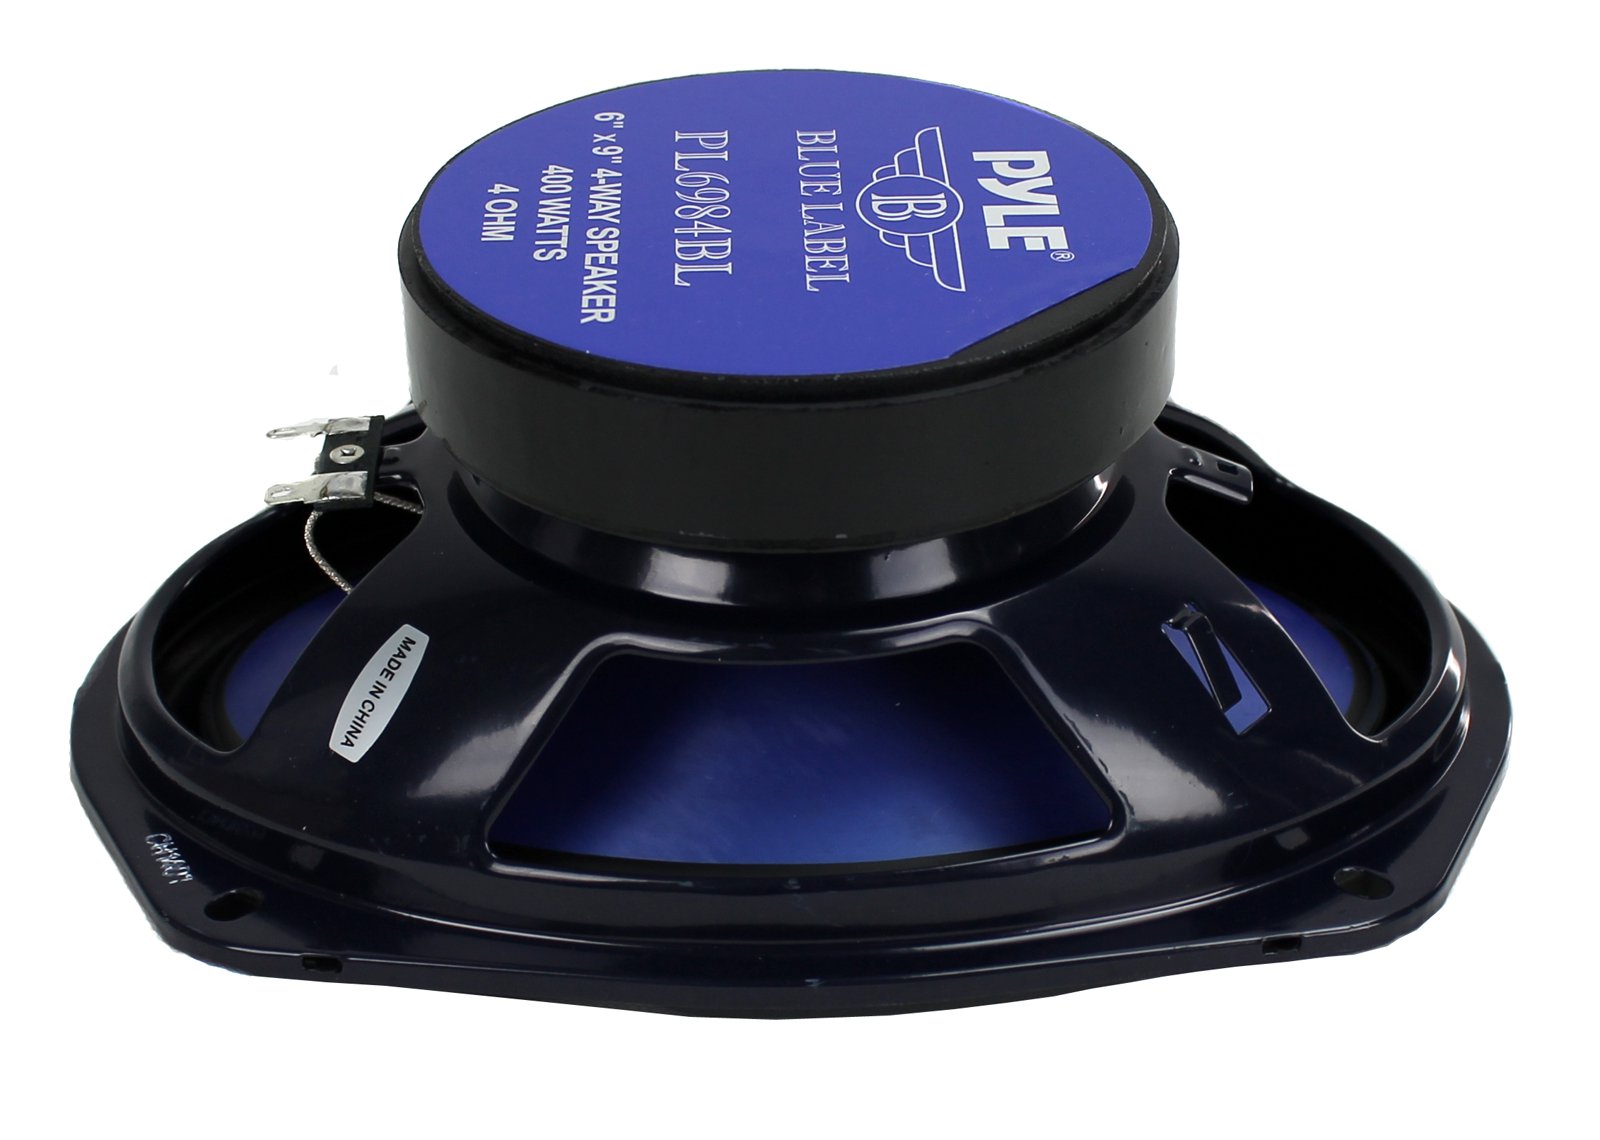 Pyle PL6984BL 6x9" 400 Watts 4-Way Car Coaxial Speakers Audio Stereo Blue - image 2 of 7